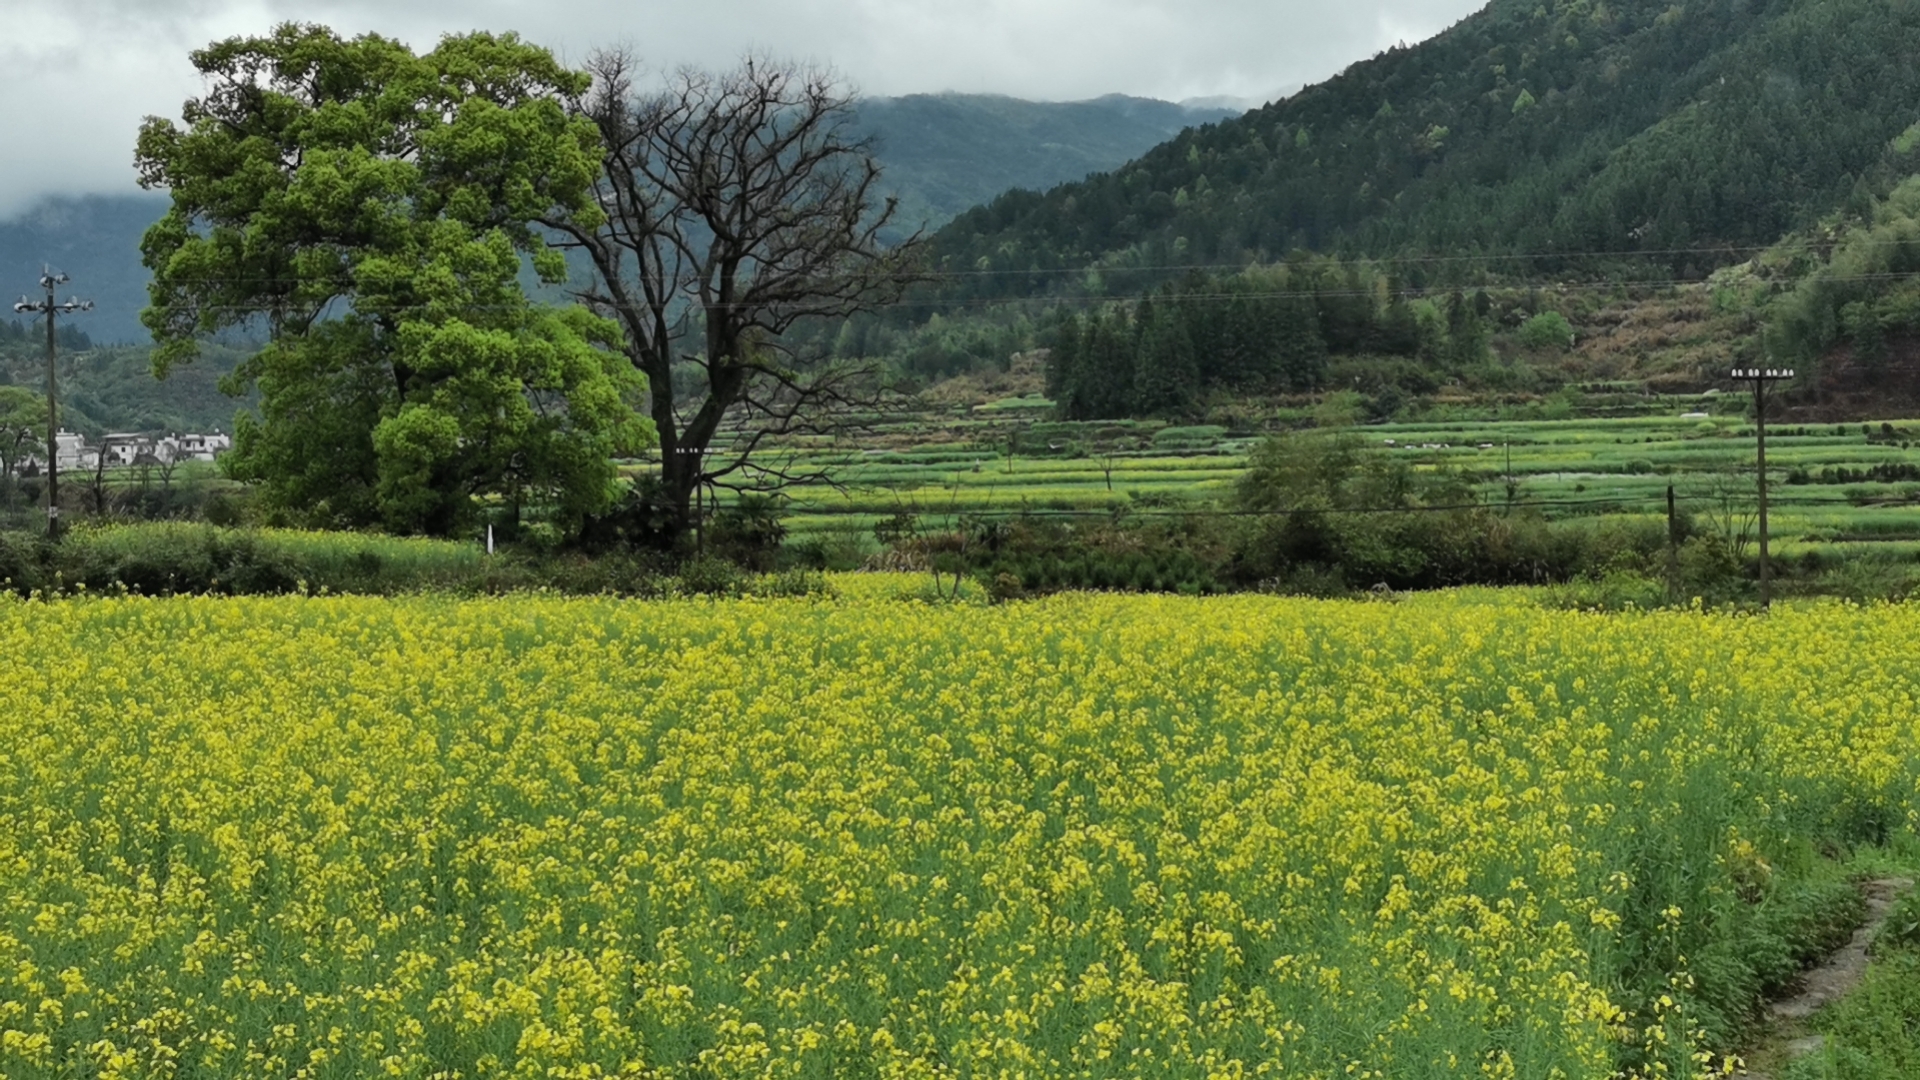 Rapeseed flowers in Shangrao City in east China's Jiangxi Province are in full bloom! The idyllic scenery is in perfect contrast with Huizhou-style residential houses, attracting tourists and photographers all over the country each year. April 4, 2023. /CGTN